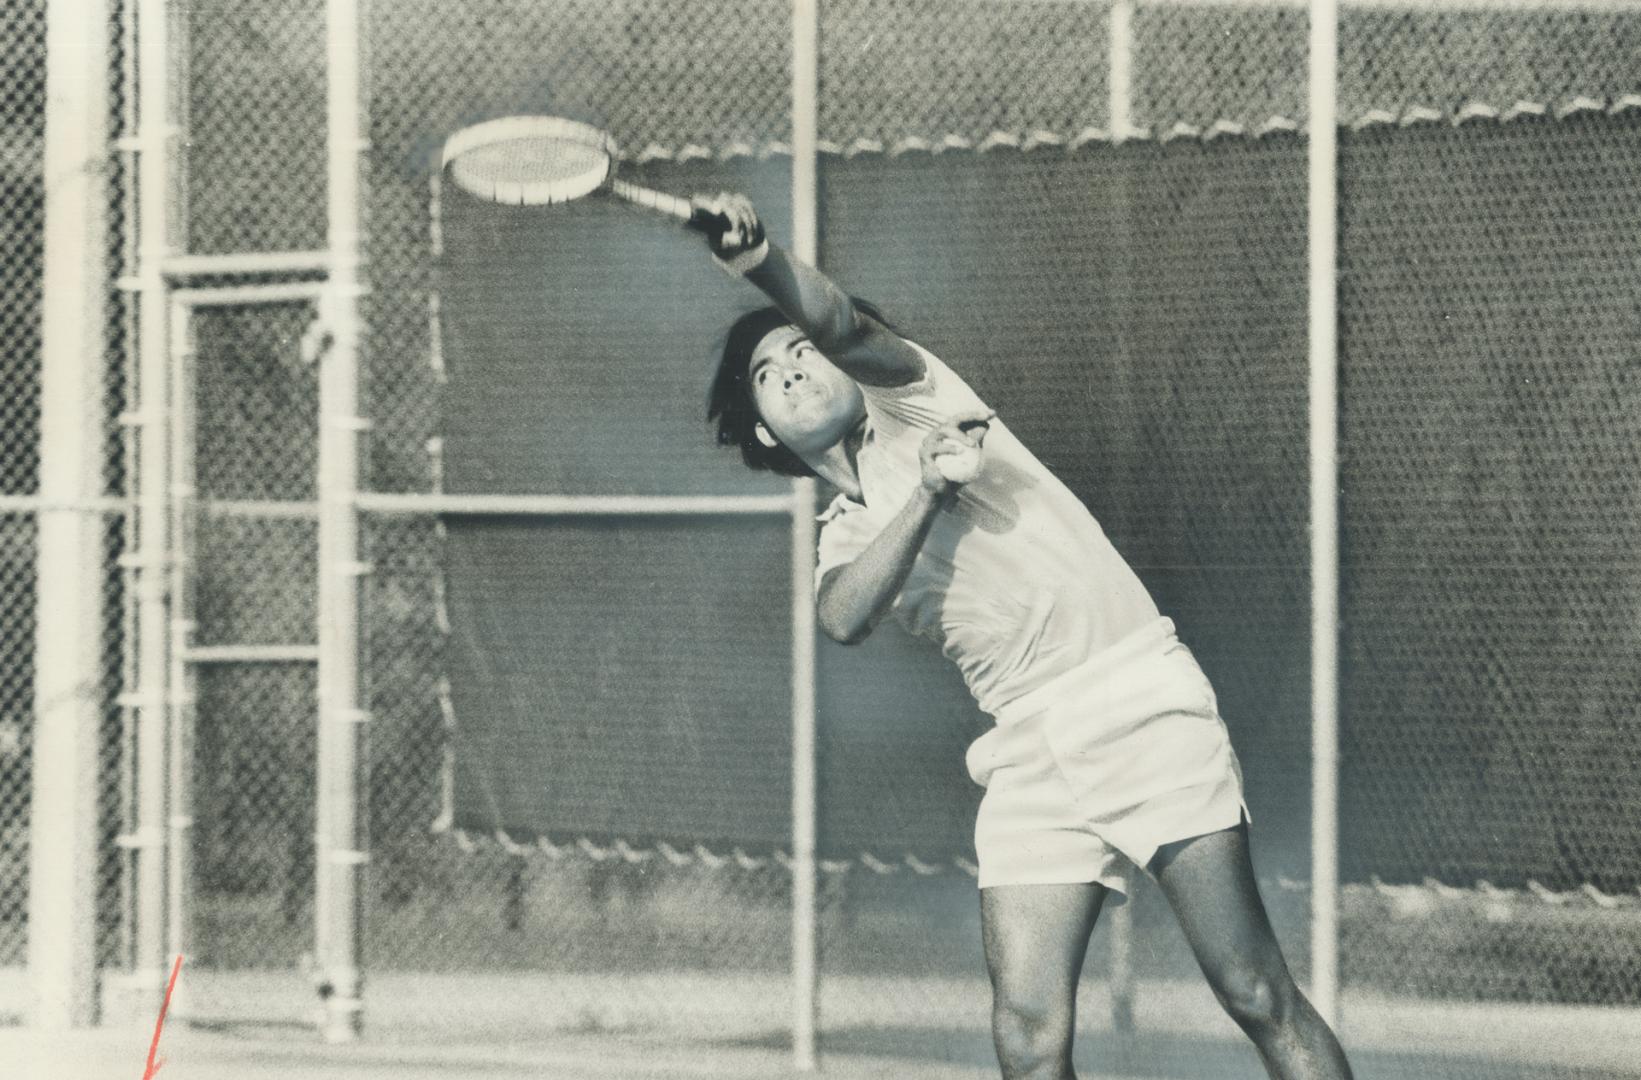 Rocketing a serve is Gus Villanueva who won two early-round matches esterday in Ontario Closed championships at Credit Valley Tennis Club. The Manila-(...)